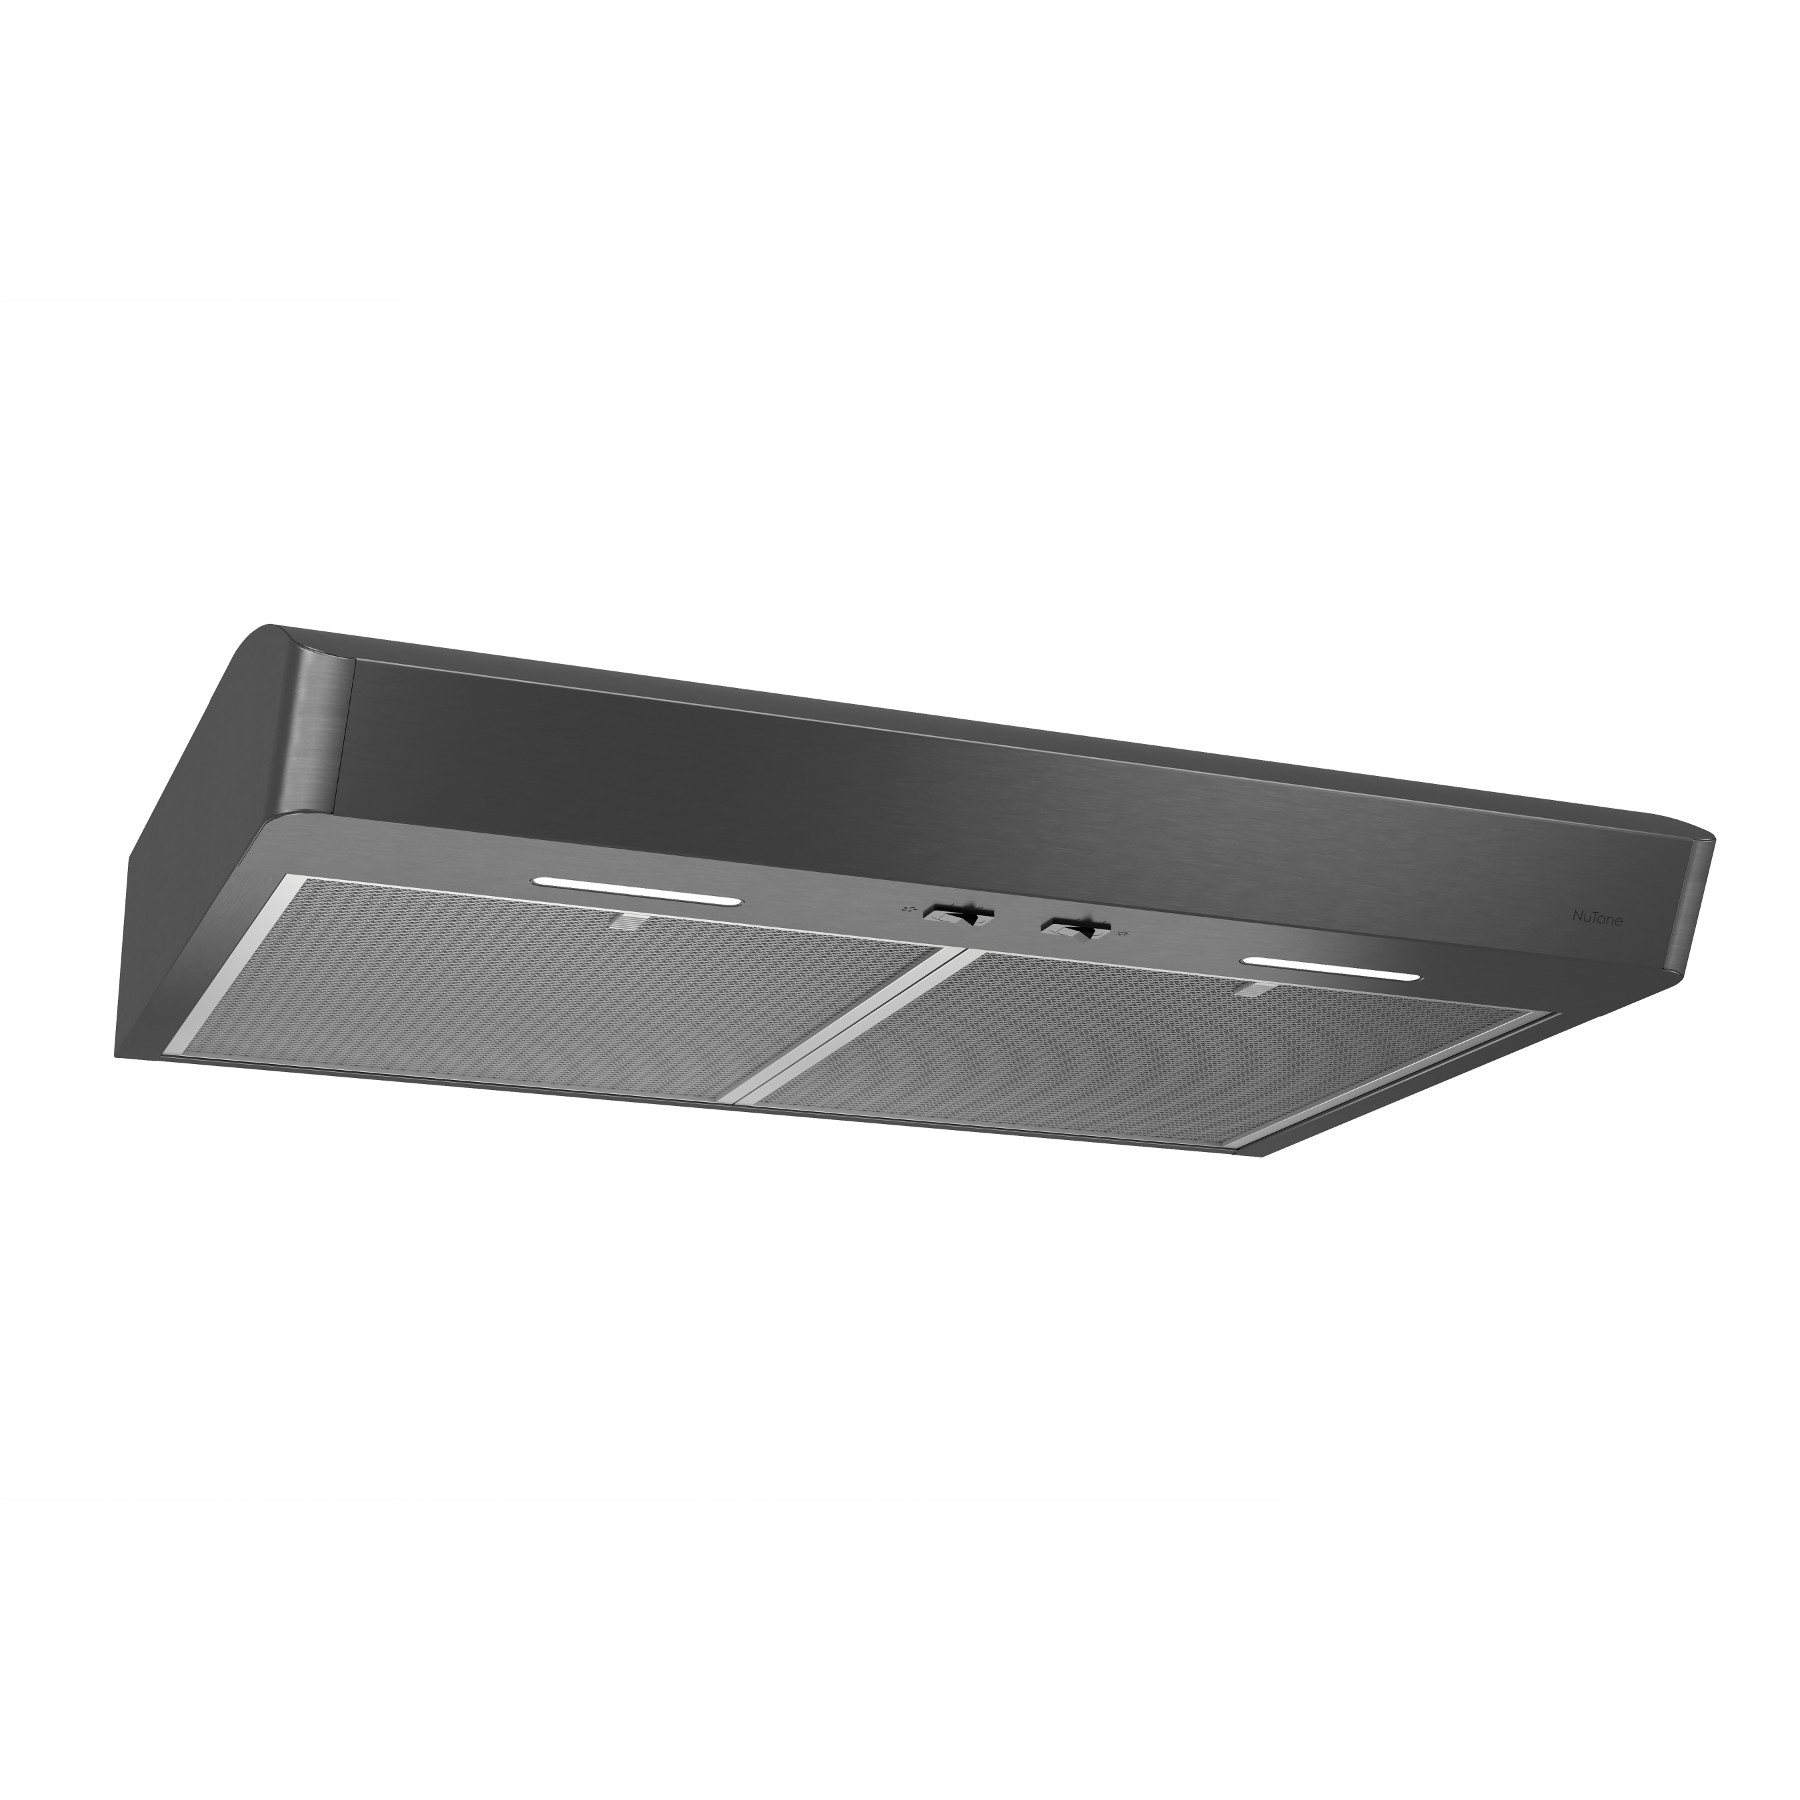 NuTone Mantra 30 In Convertible Range Hood in Stainless Steel C0772 A91 for sale online 